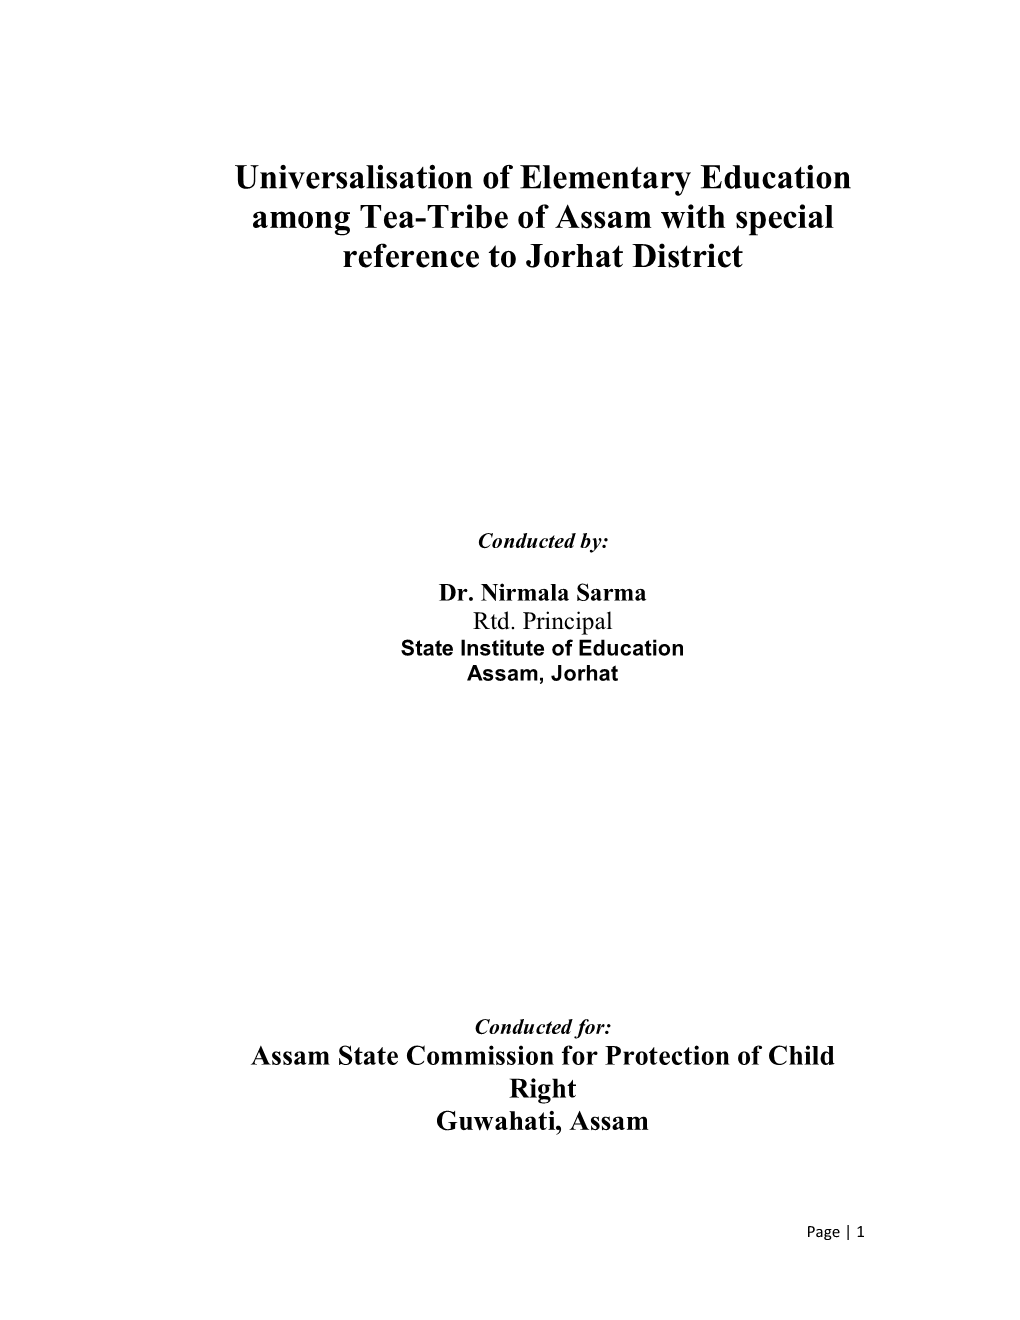 Universalisation of Elementary Education Among Tea-Tribe of Assam with Special Reference to Jorhat District